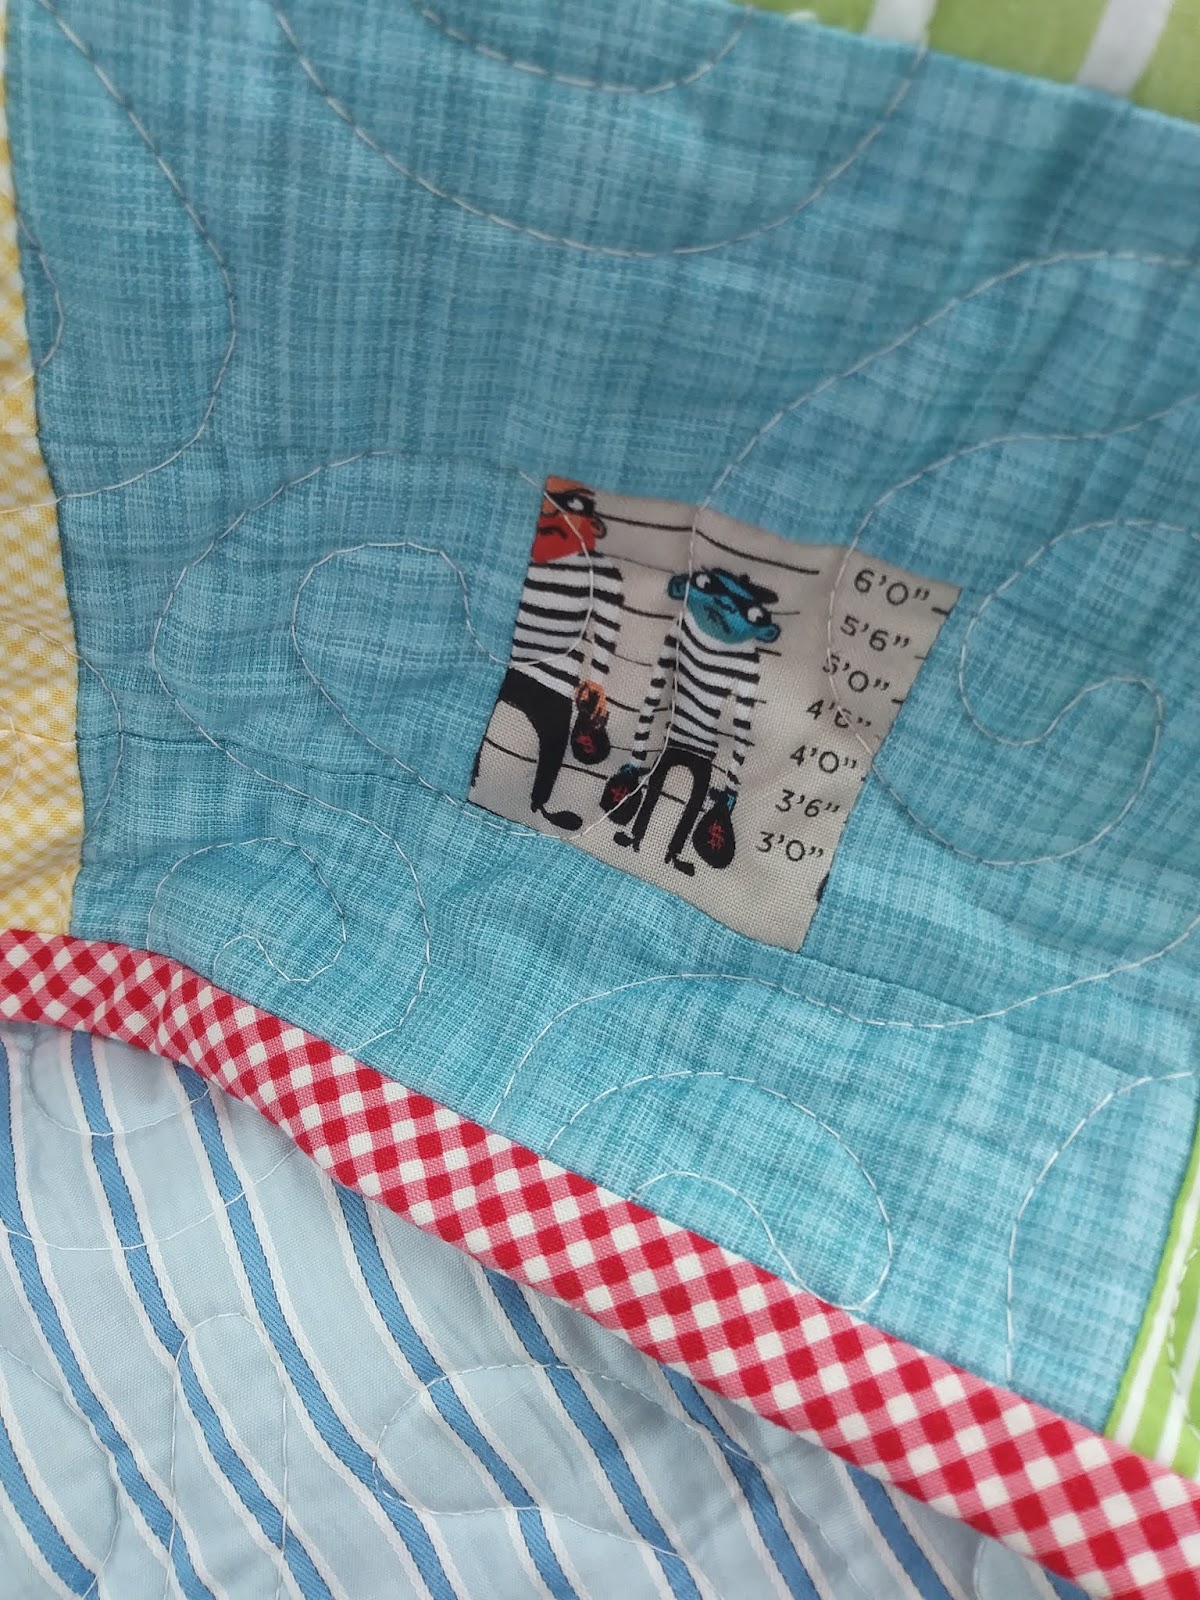 Northern Deb Quilts: Charlie's I-Spy quilt is DONE!